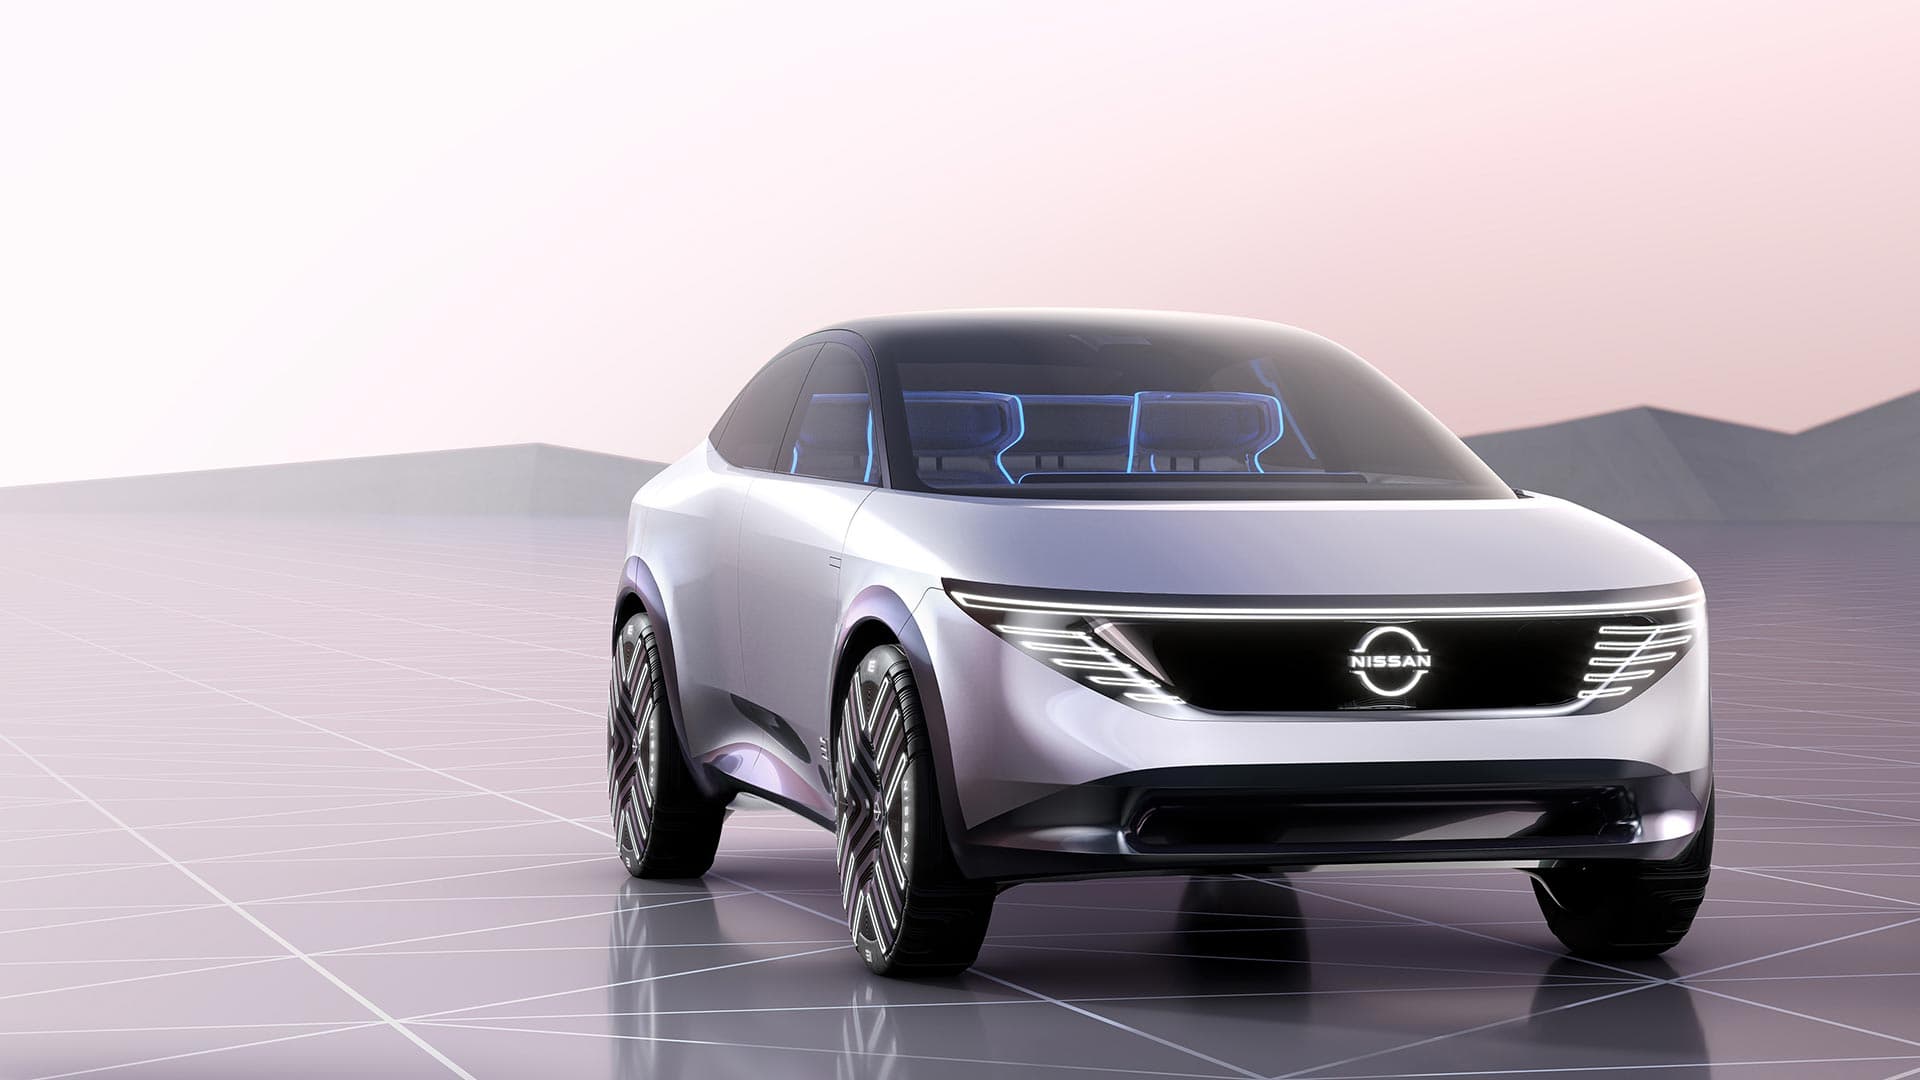 NISSAN CHILL-OUT Concept Car Image